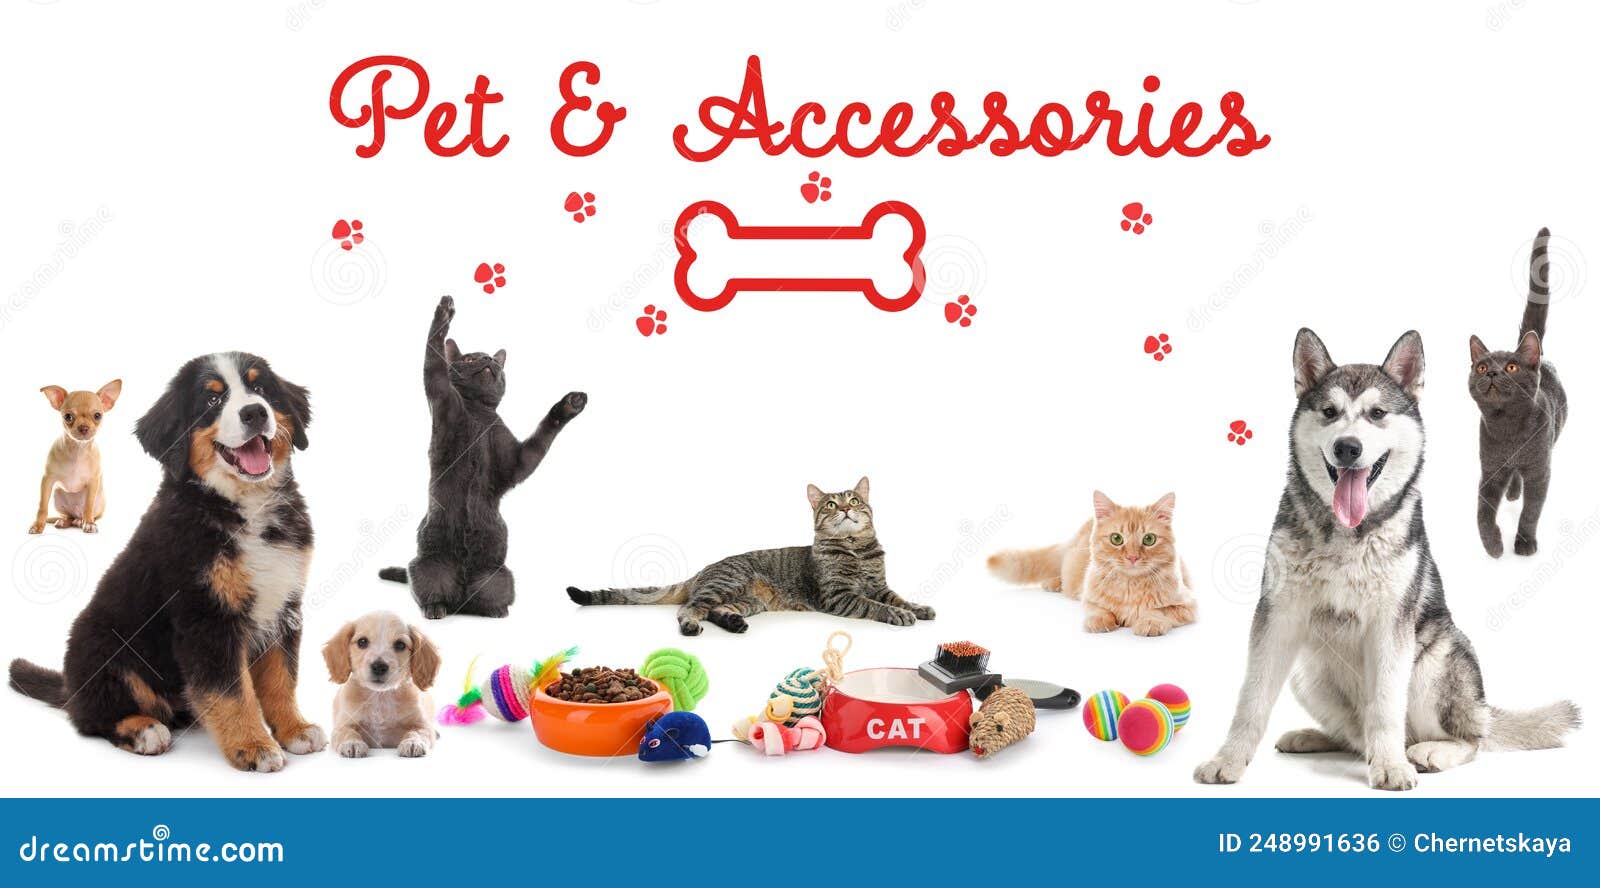 Advertising Banner Design for Pet Shop. Cute Dogs, Cats and Different  Accessories on White Background Stock Photo - Image of items, food:  248991636